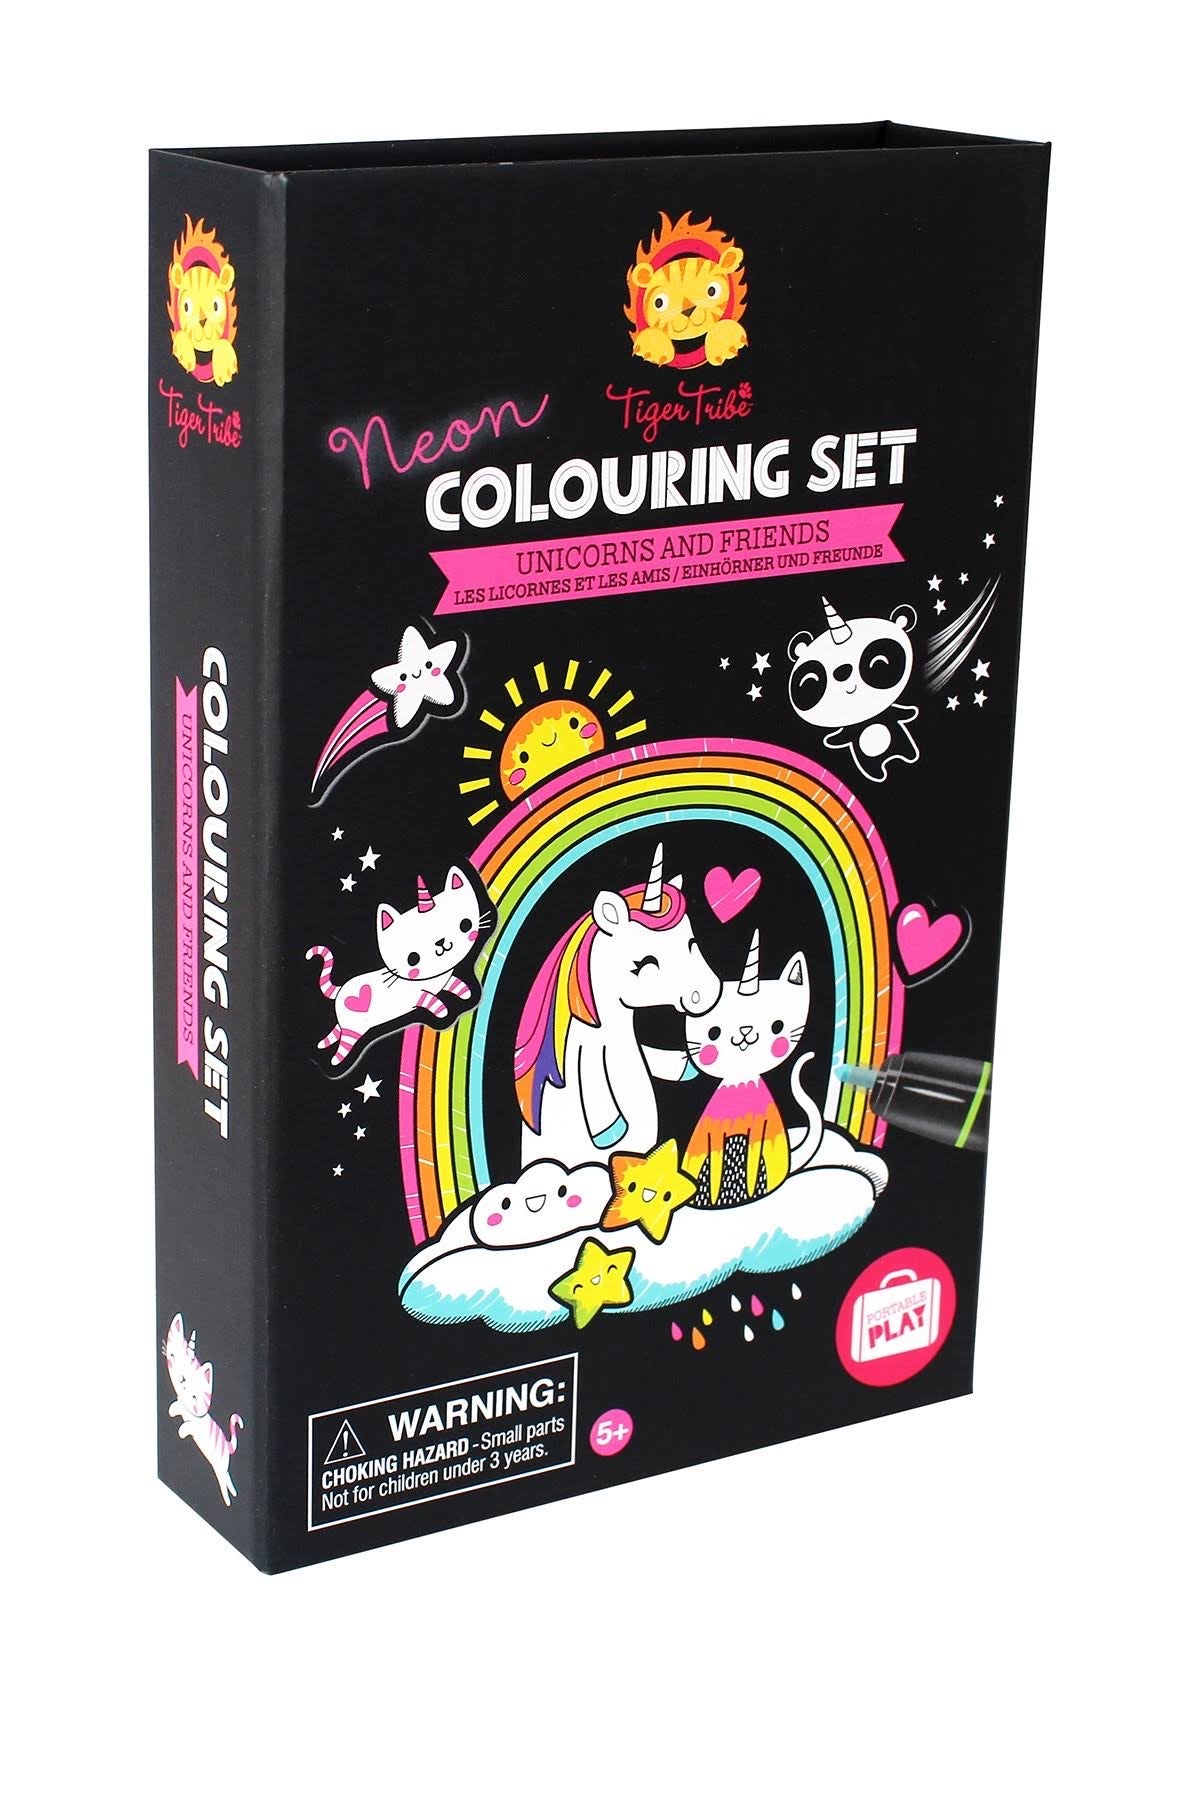 Tiger Tribe Neon Colouring Set Unicorns and Friends  - Doodlebug's Children's Boutique